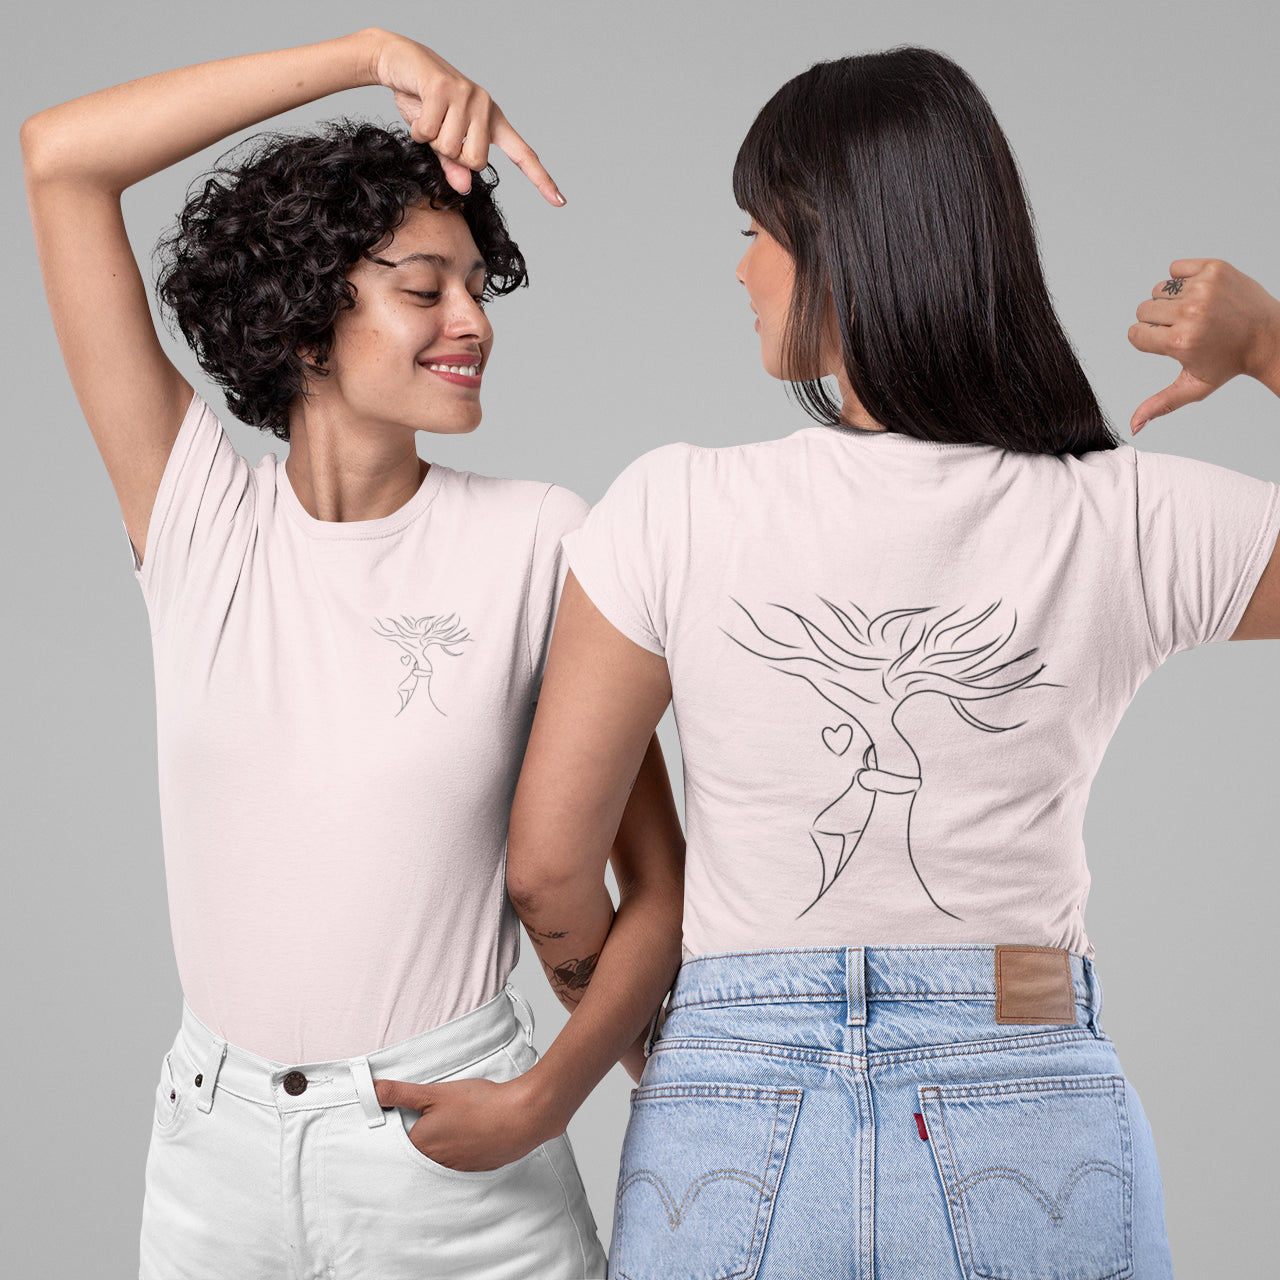 Sustainable Embrace Tree | 100% Organic Cotton T Shirt worn by two women